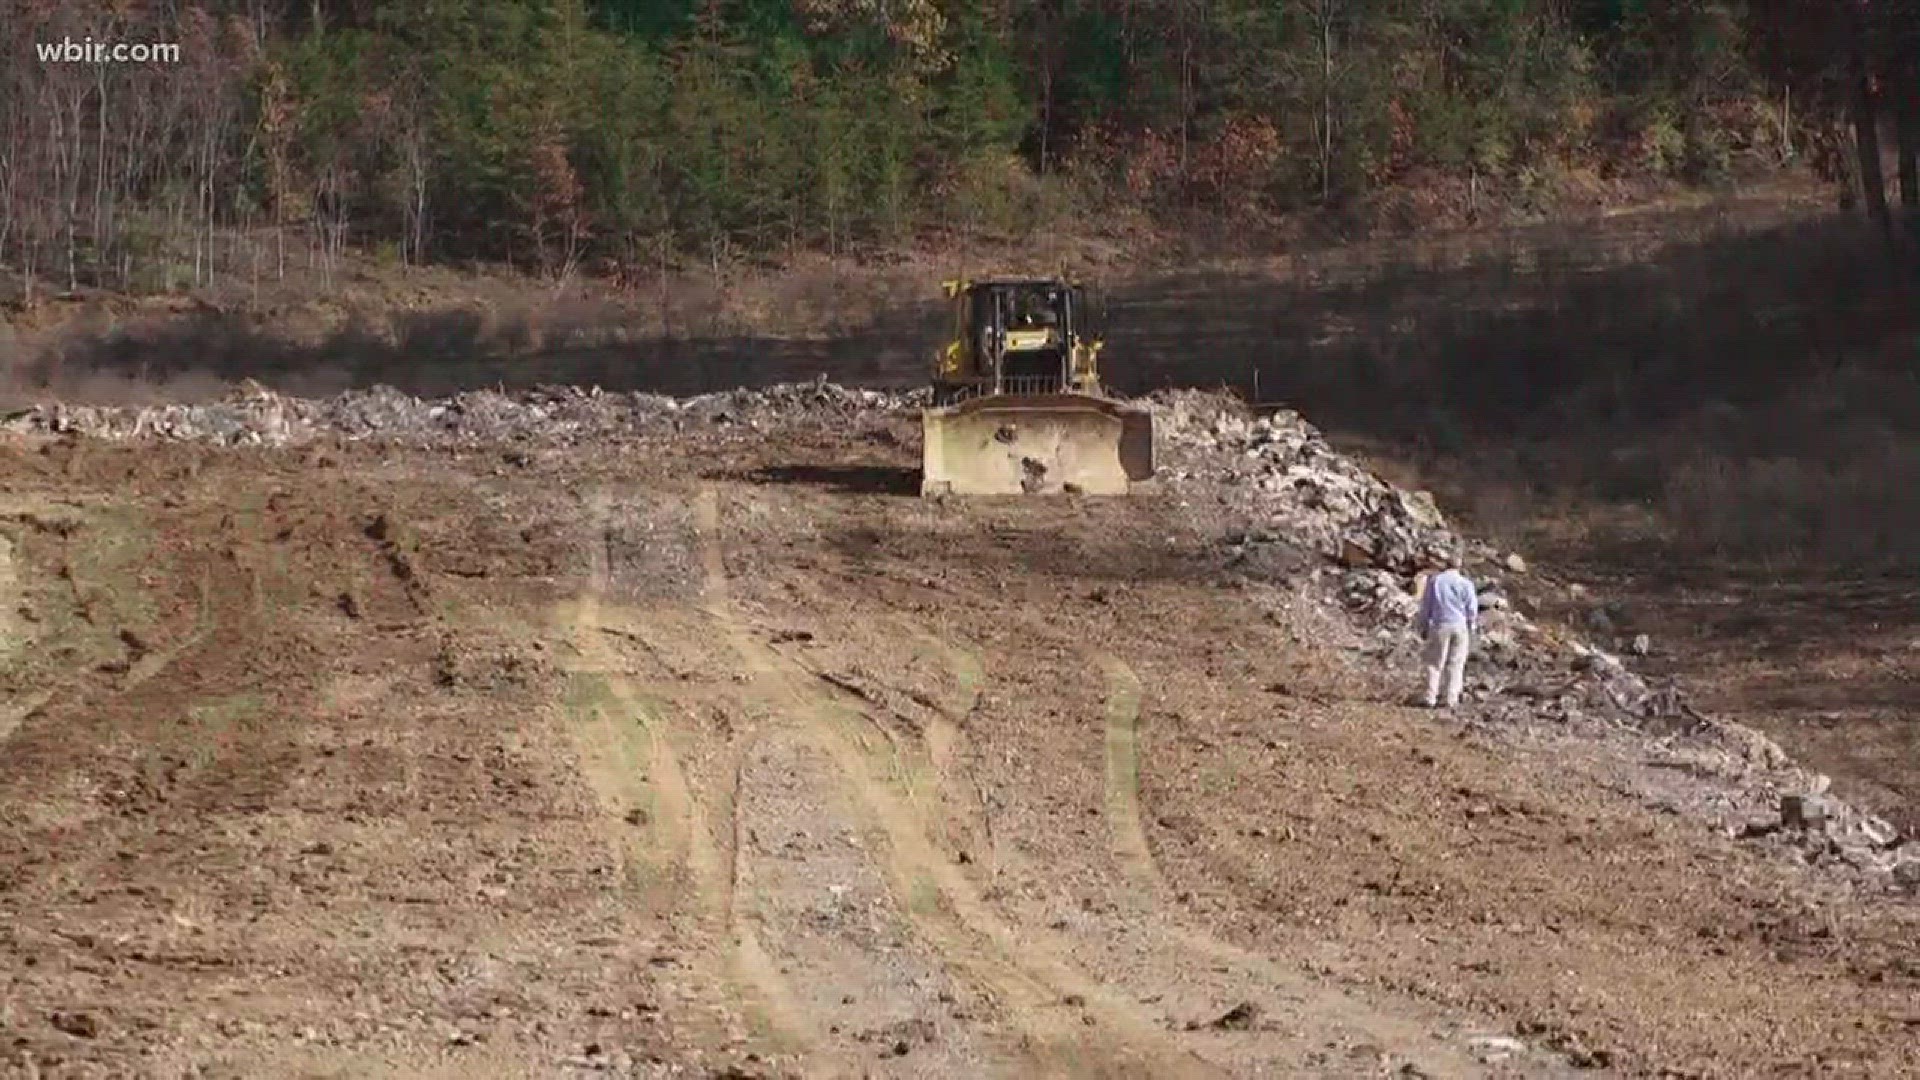 Nov. 15, 2017: Sevier County is preparing to open a new landfill after the current one is almost full from wildfire debris.